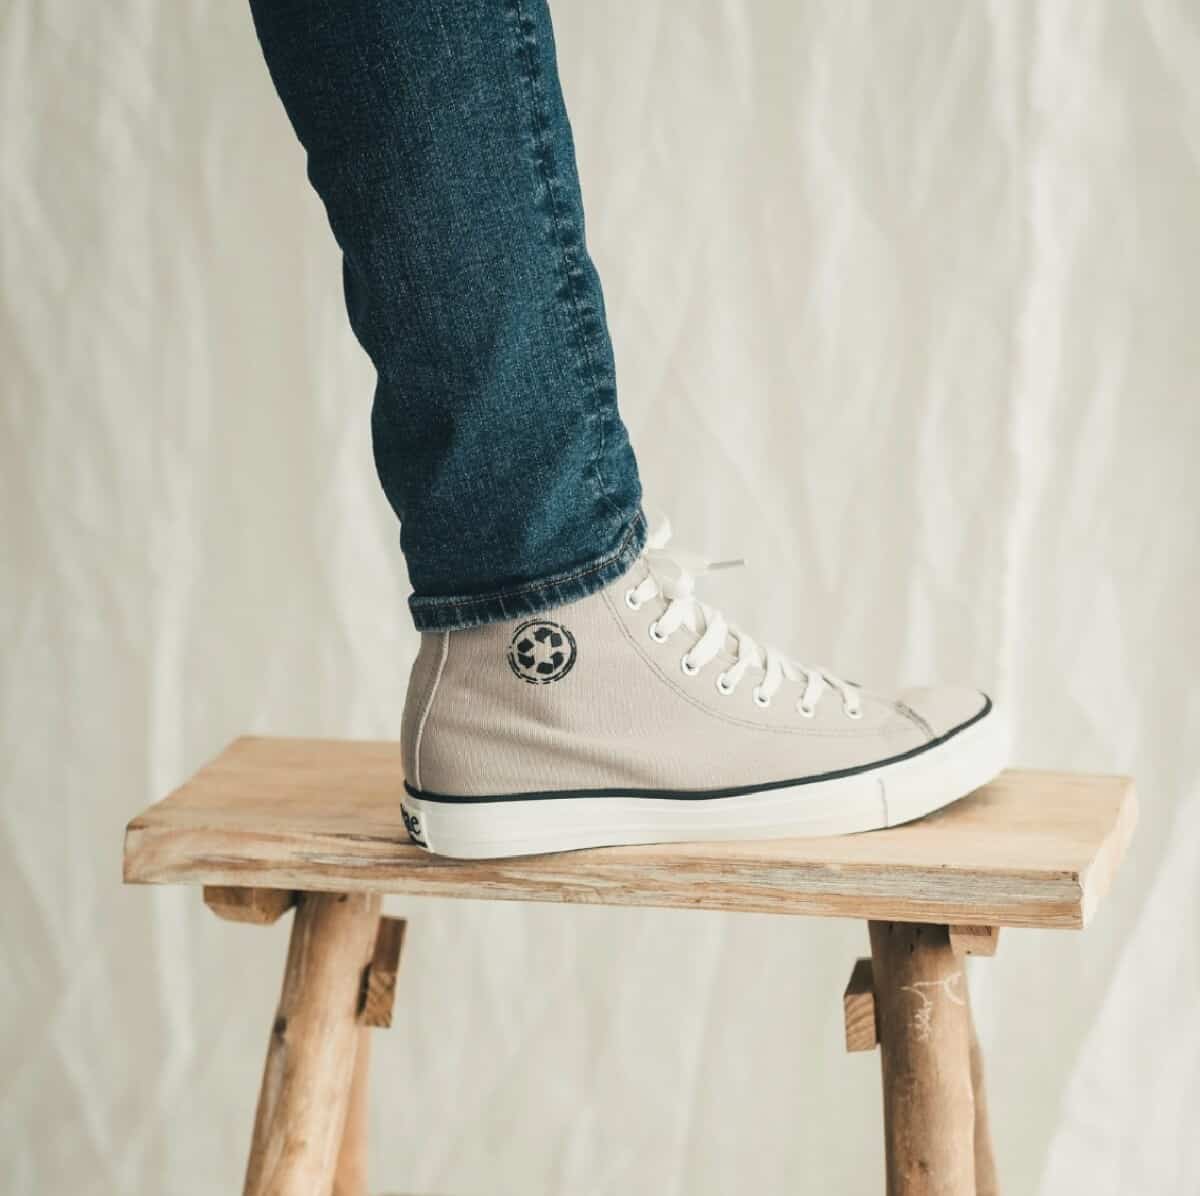 A beige and white high top vegan sneaker on a person with blue jeans leaning on a wooden stool with a white background.